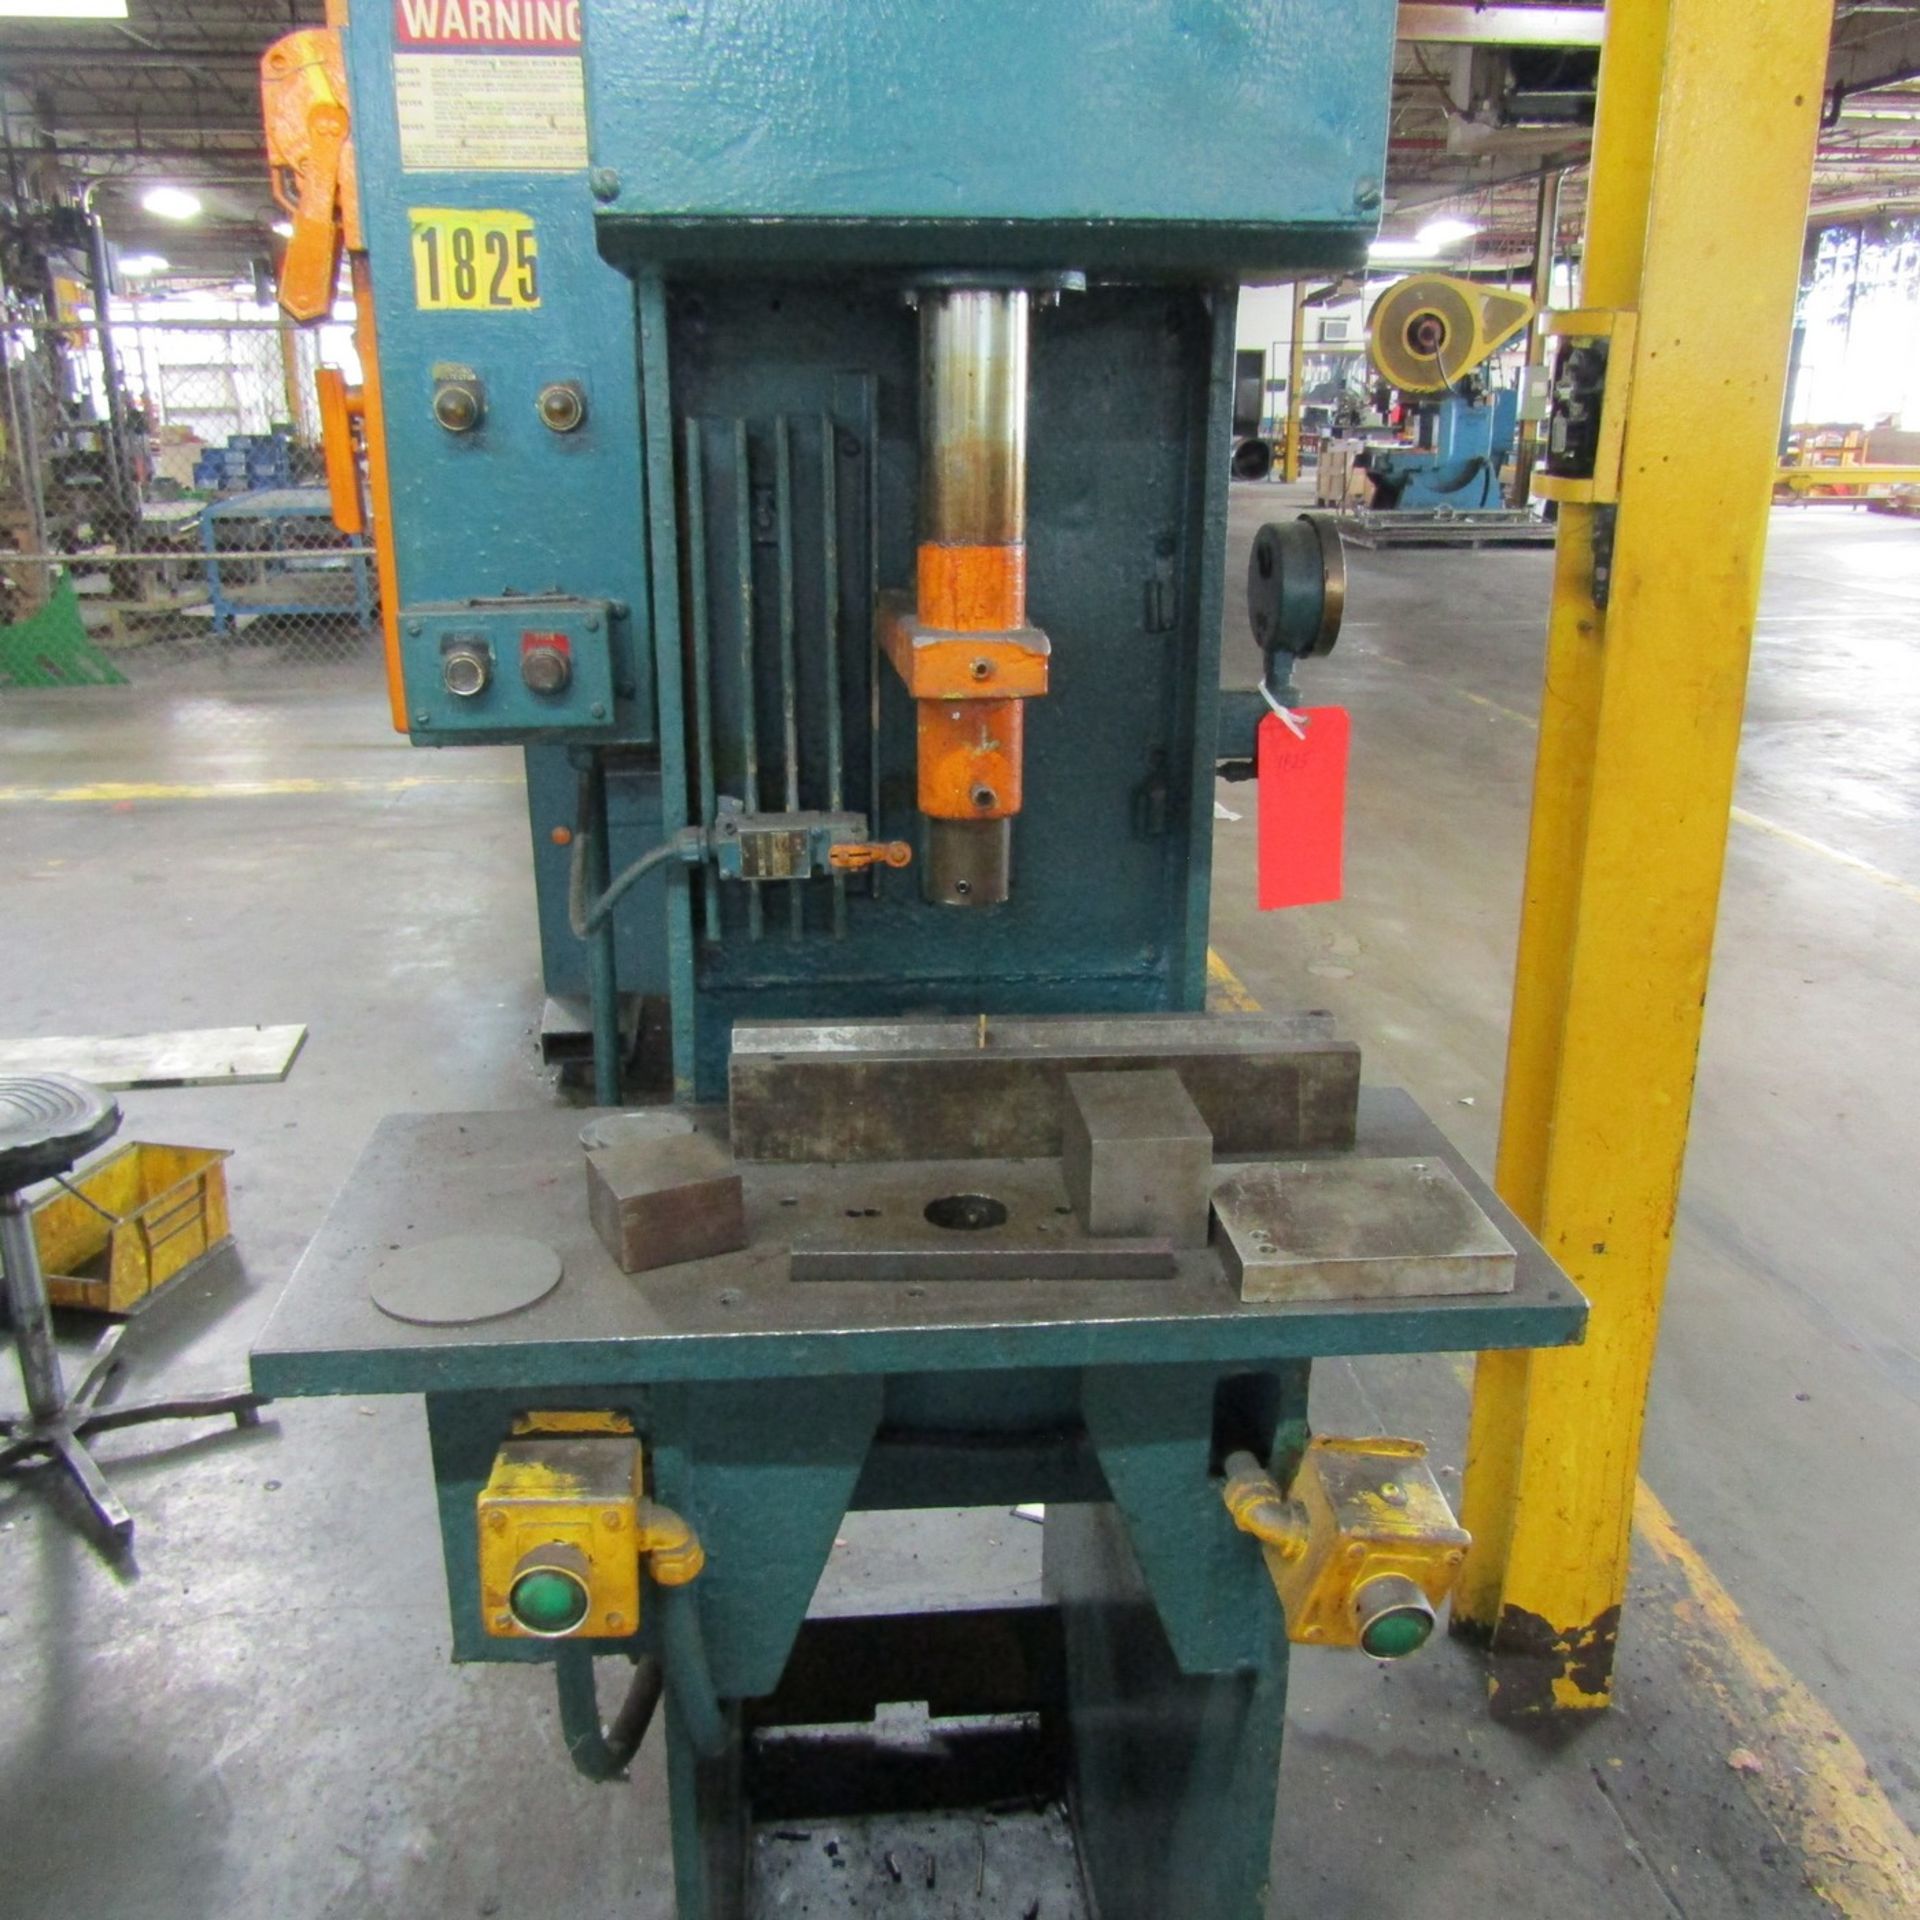 Hannifin 8-Ton Cap. Model F 21-41-M Hydraulic Press, S/N: E 37373-4; Rated at 3,000-PSI, Palm - Image 4 of 6